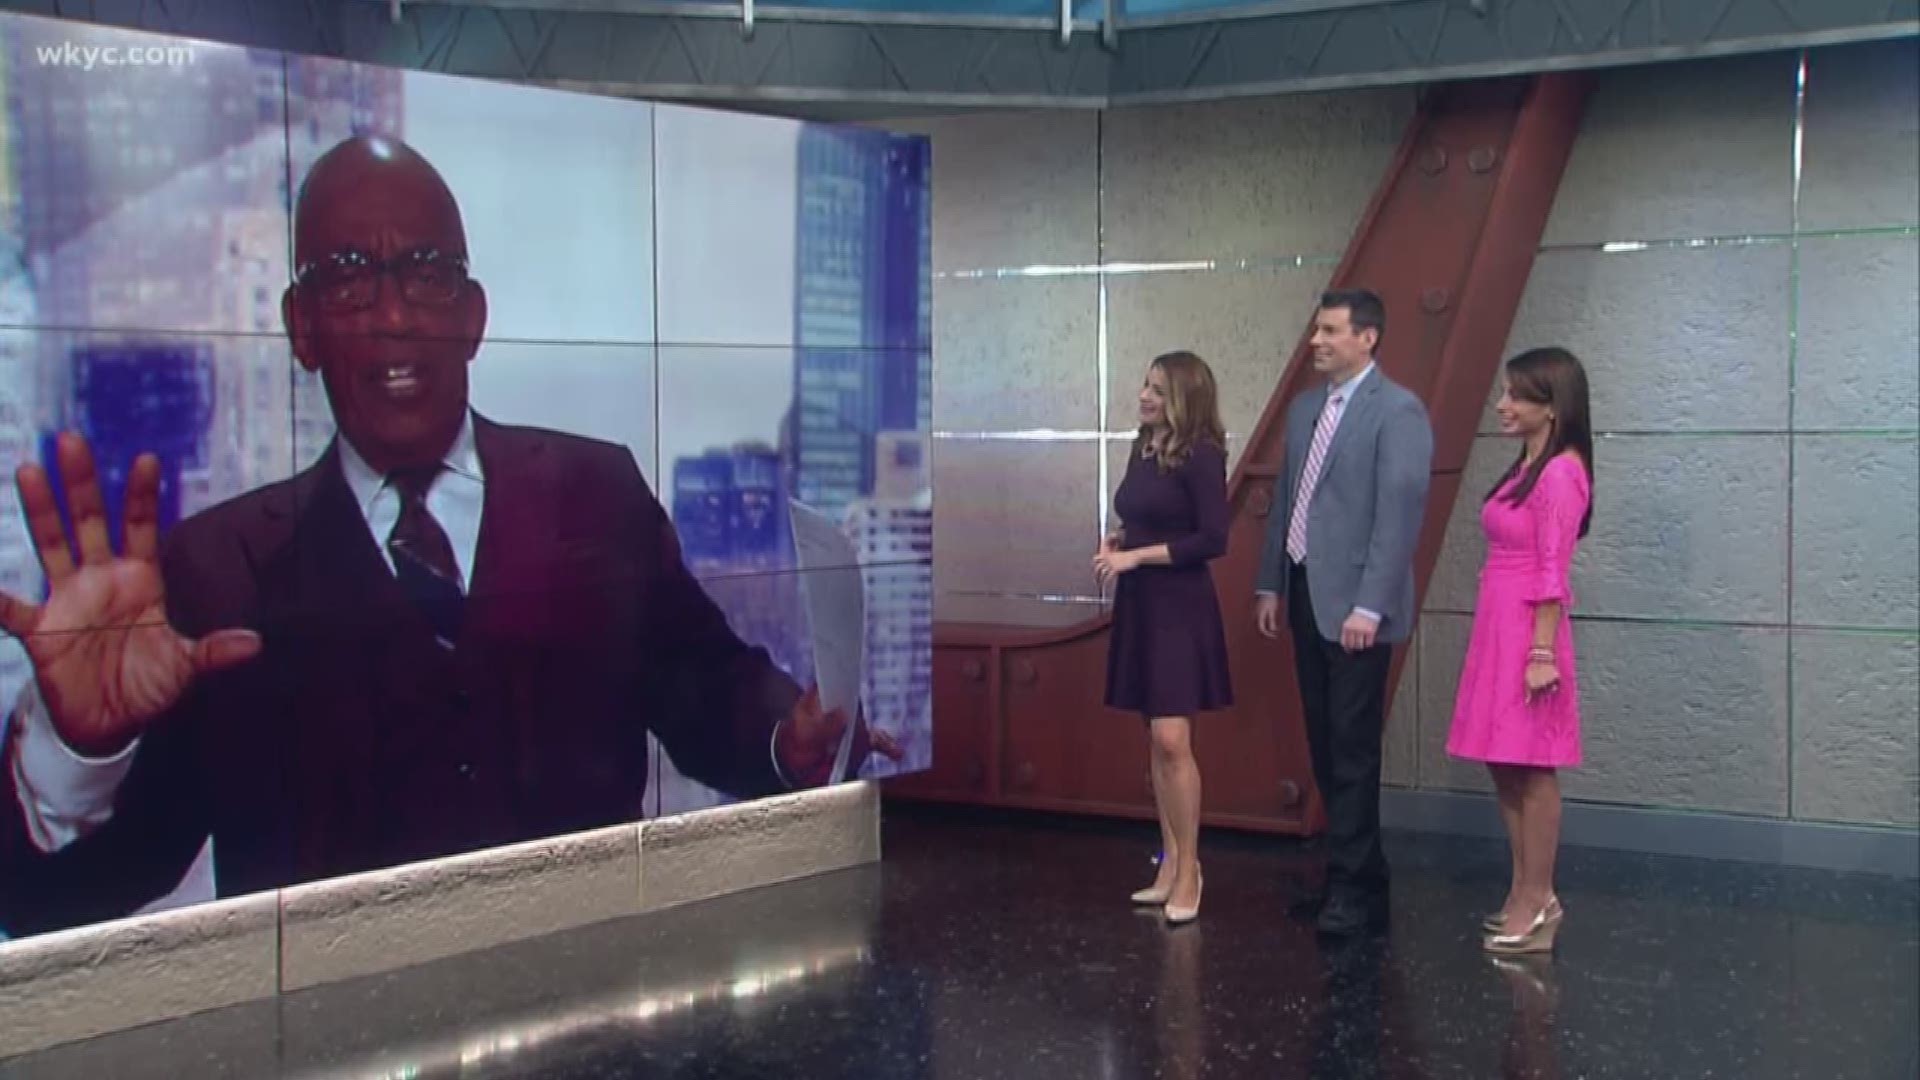 Feb. 11, 2019: We had some fun with Al Roker this morning.